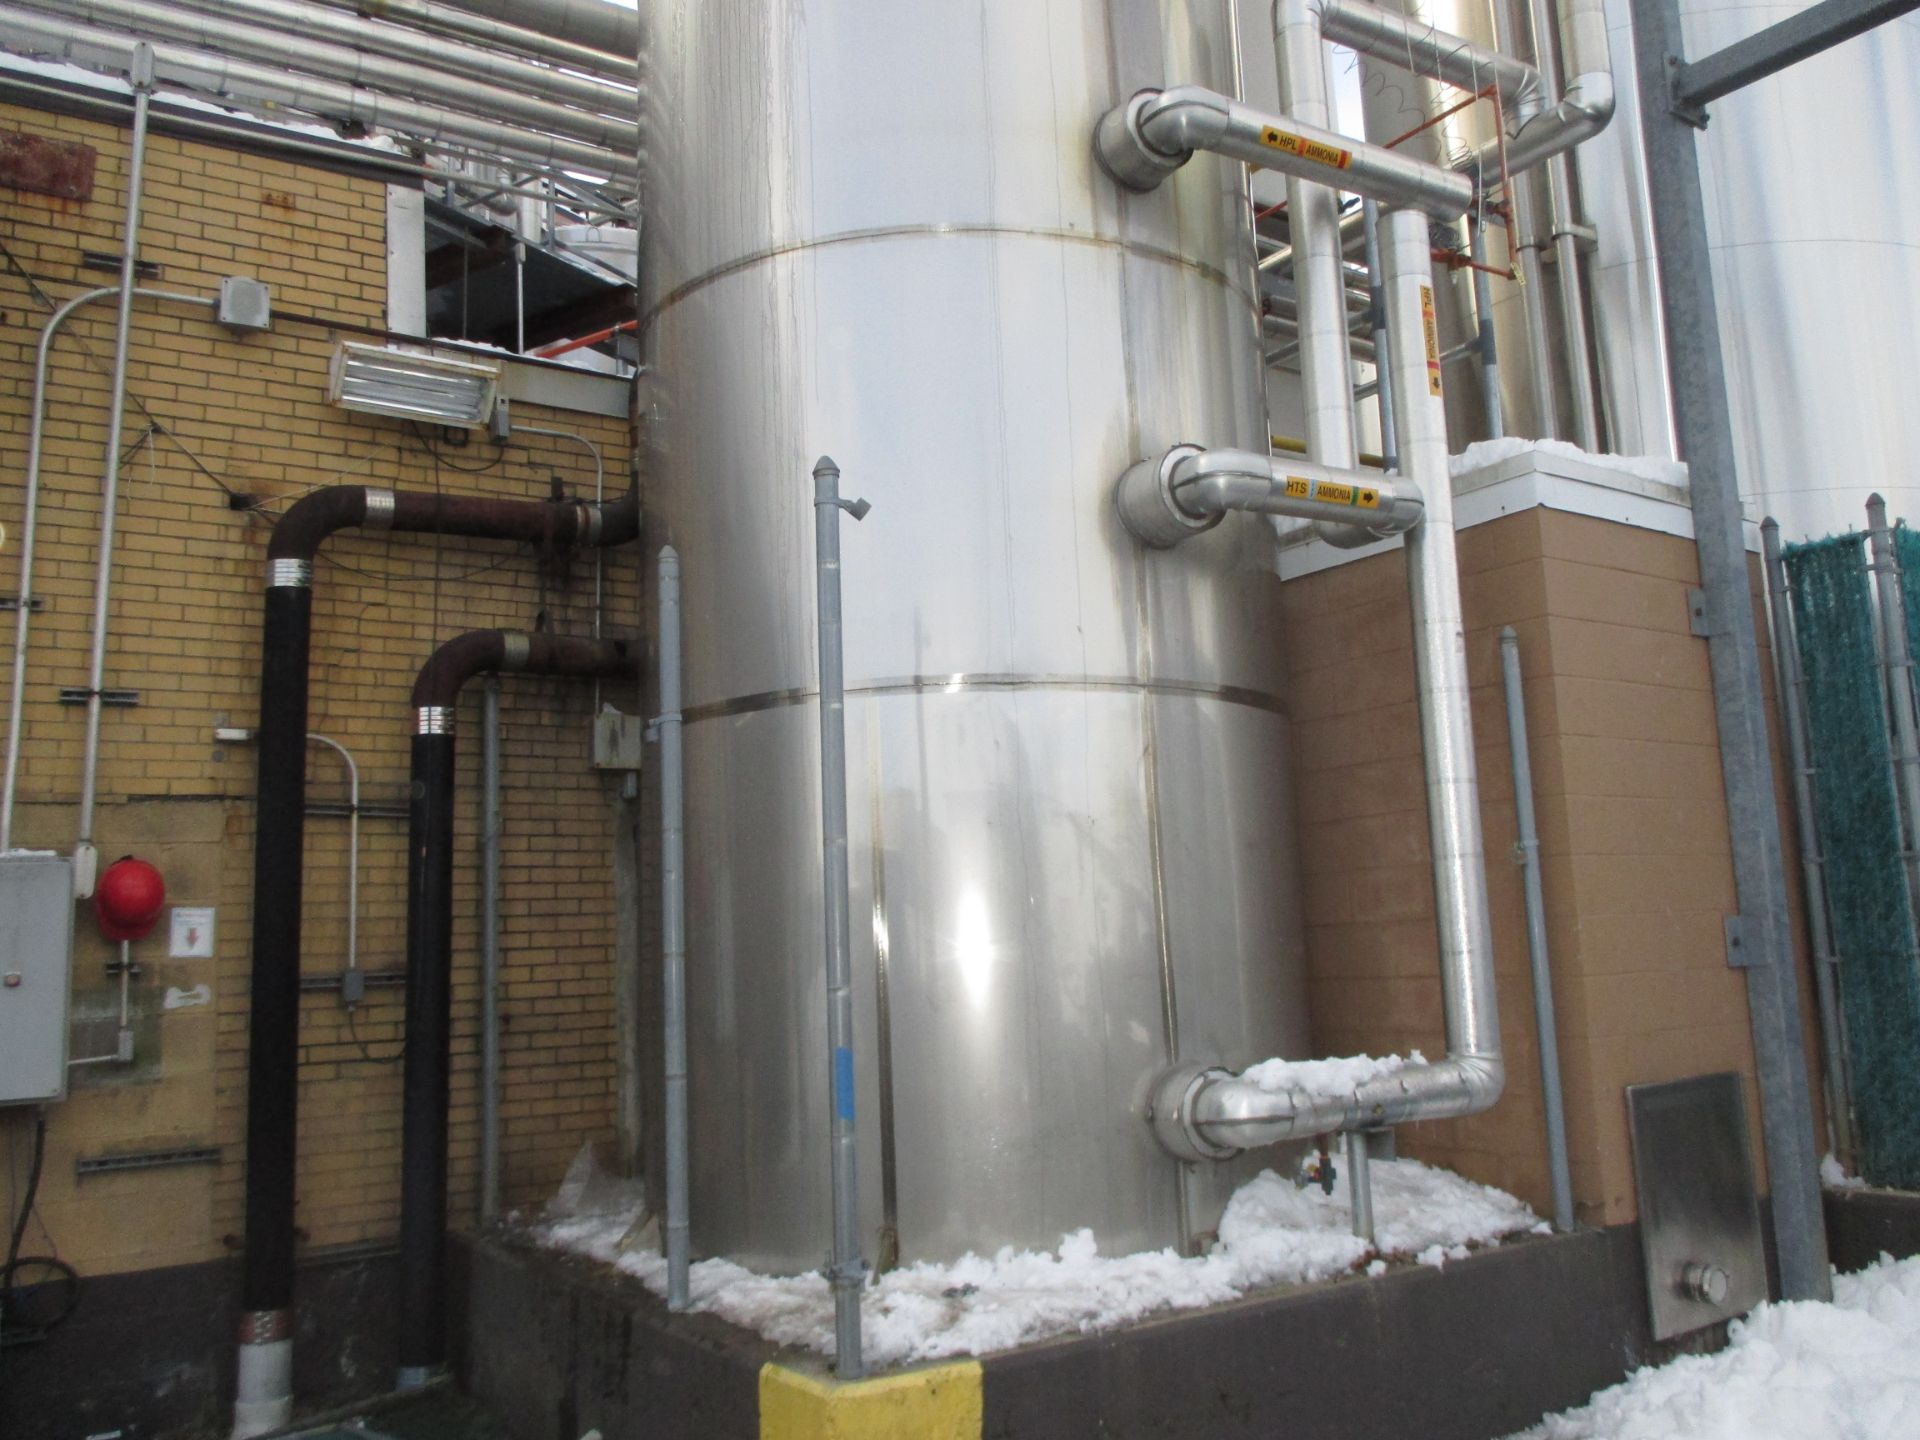 Cherry Burrell 10,000 Gal. Refrigerated Silo, with S/S Exterior, Vertical Agitation, Hydraulic Motor - Image 2 of 6